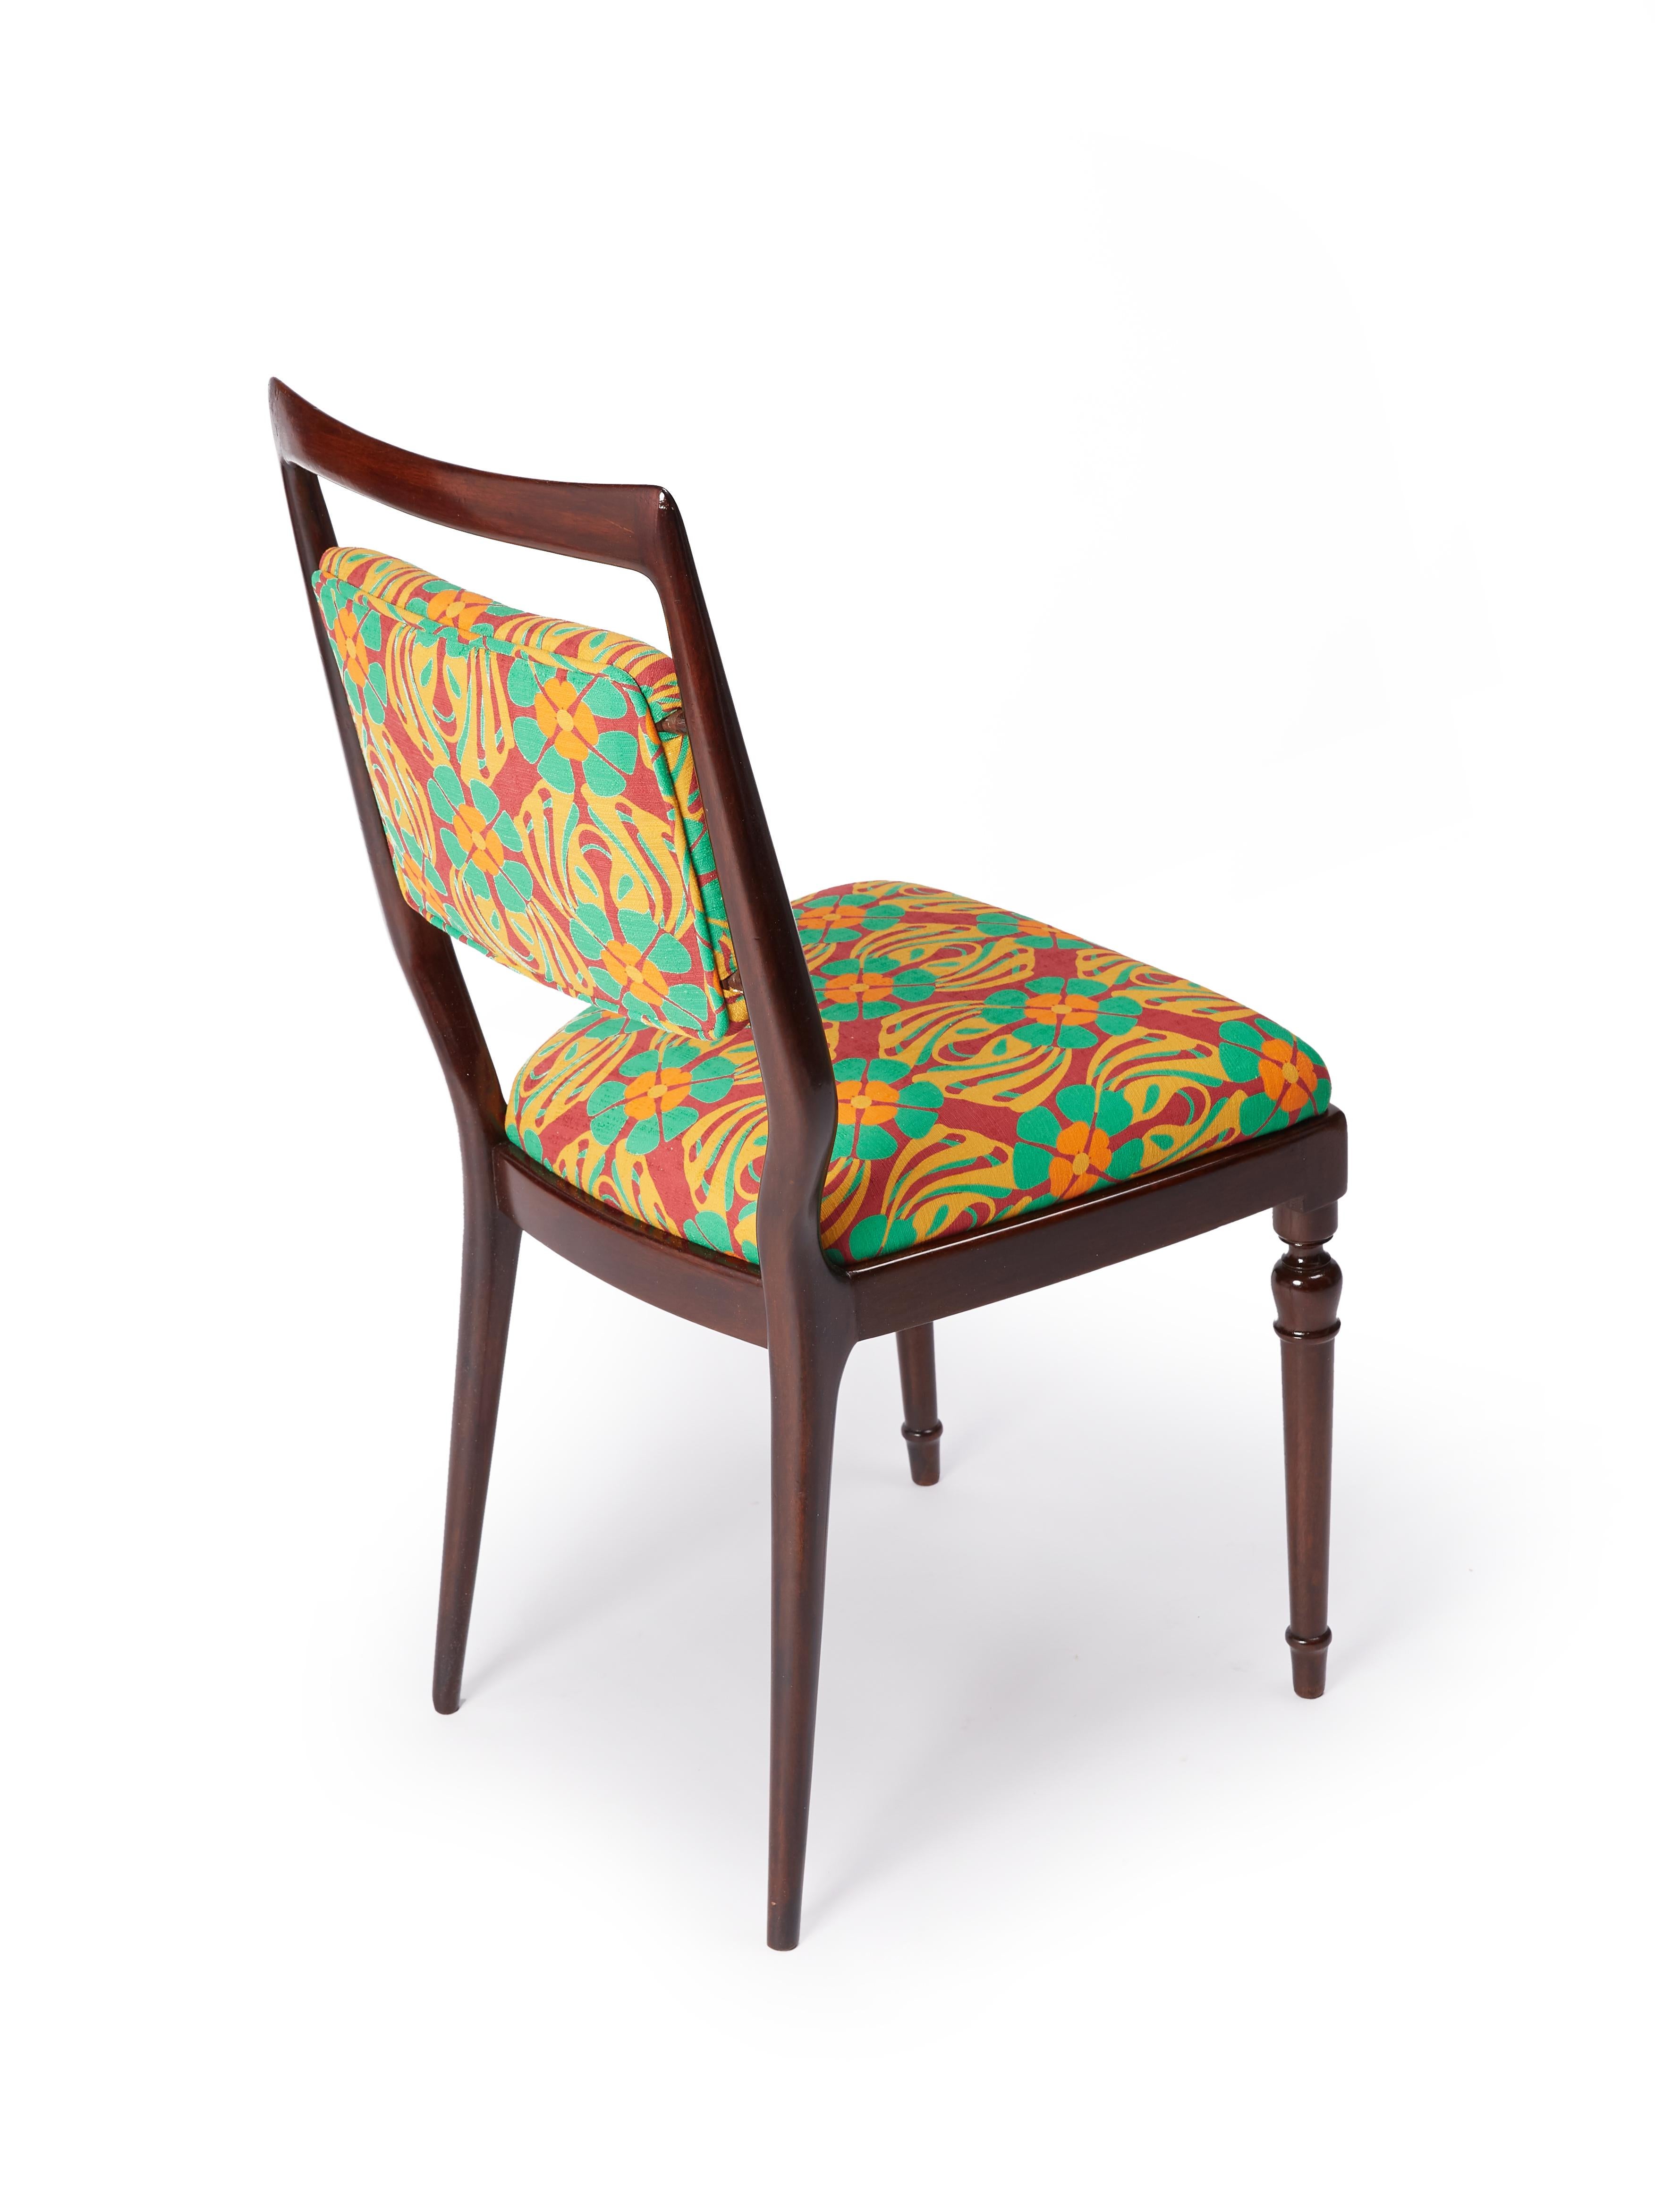 French Set of Six Vintage Cherrywood Chairs by La Doublej, Cubi Print, France, 1940